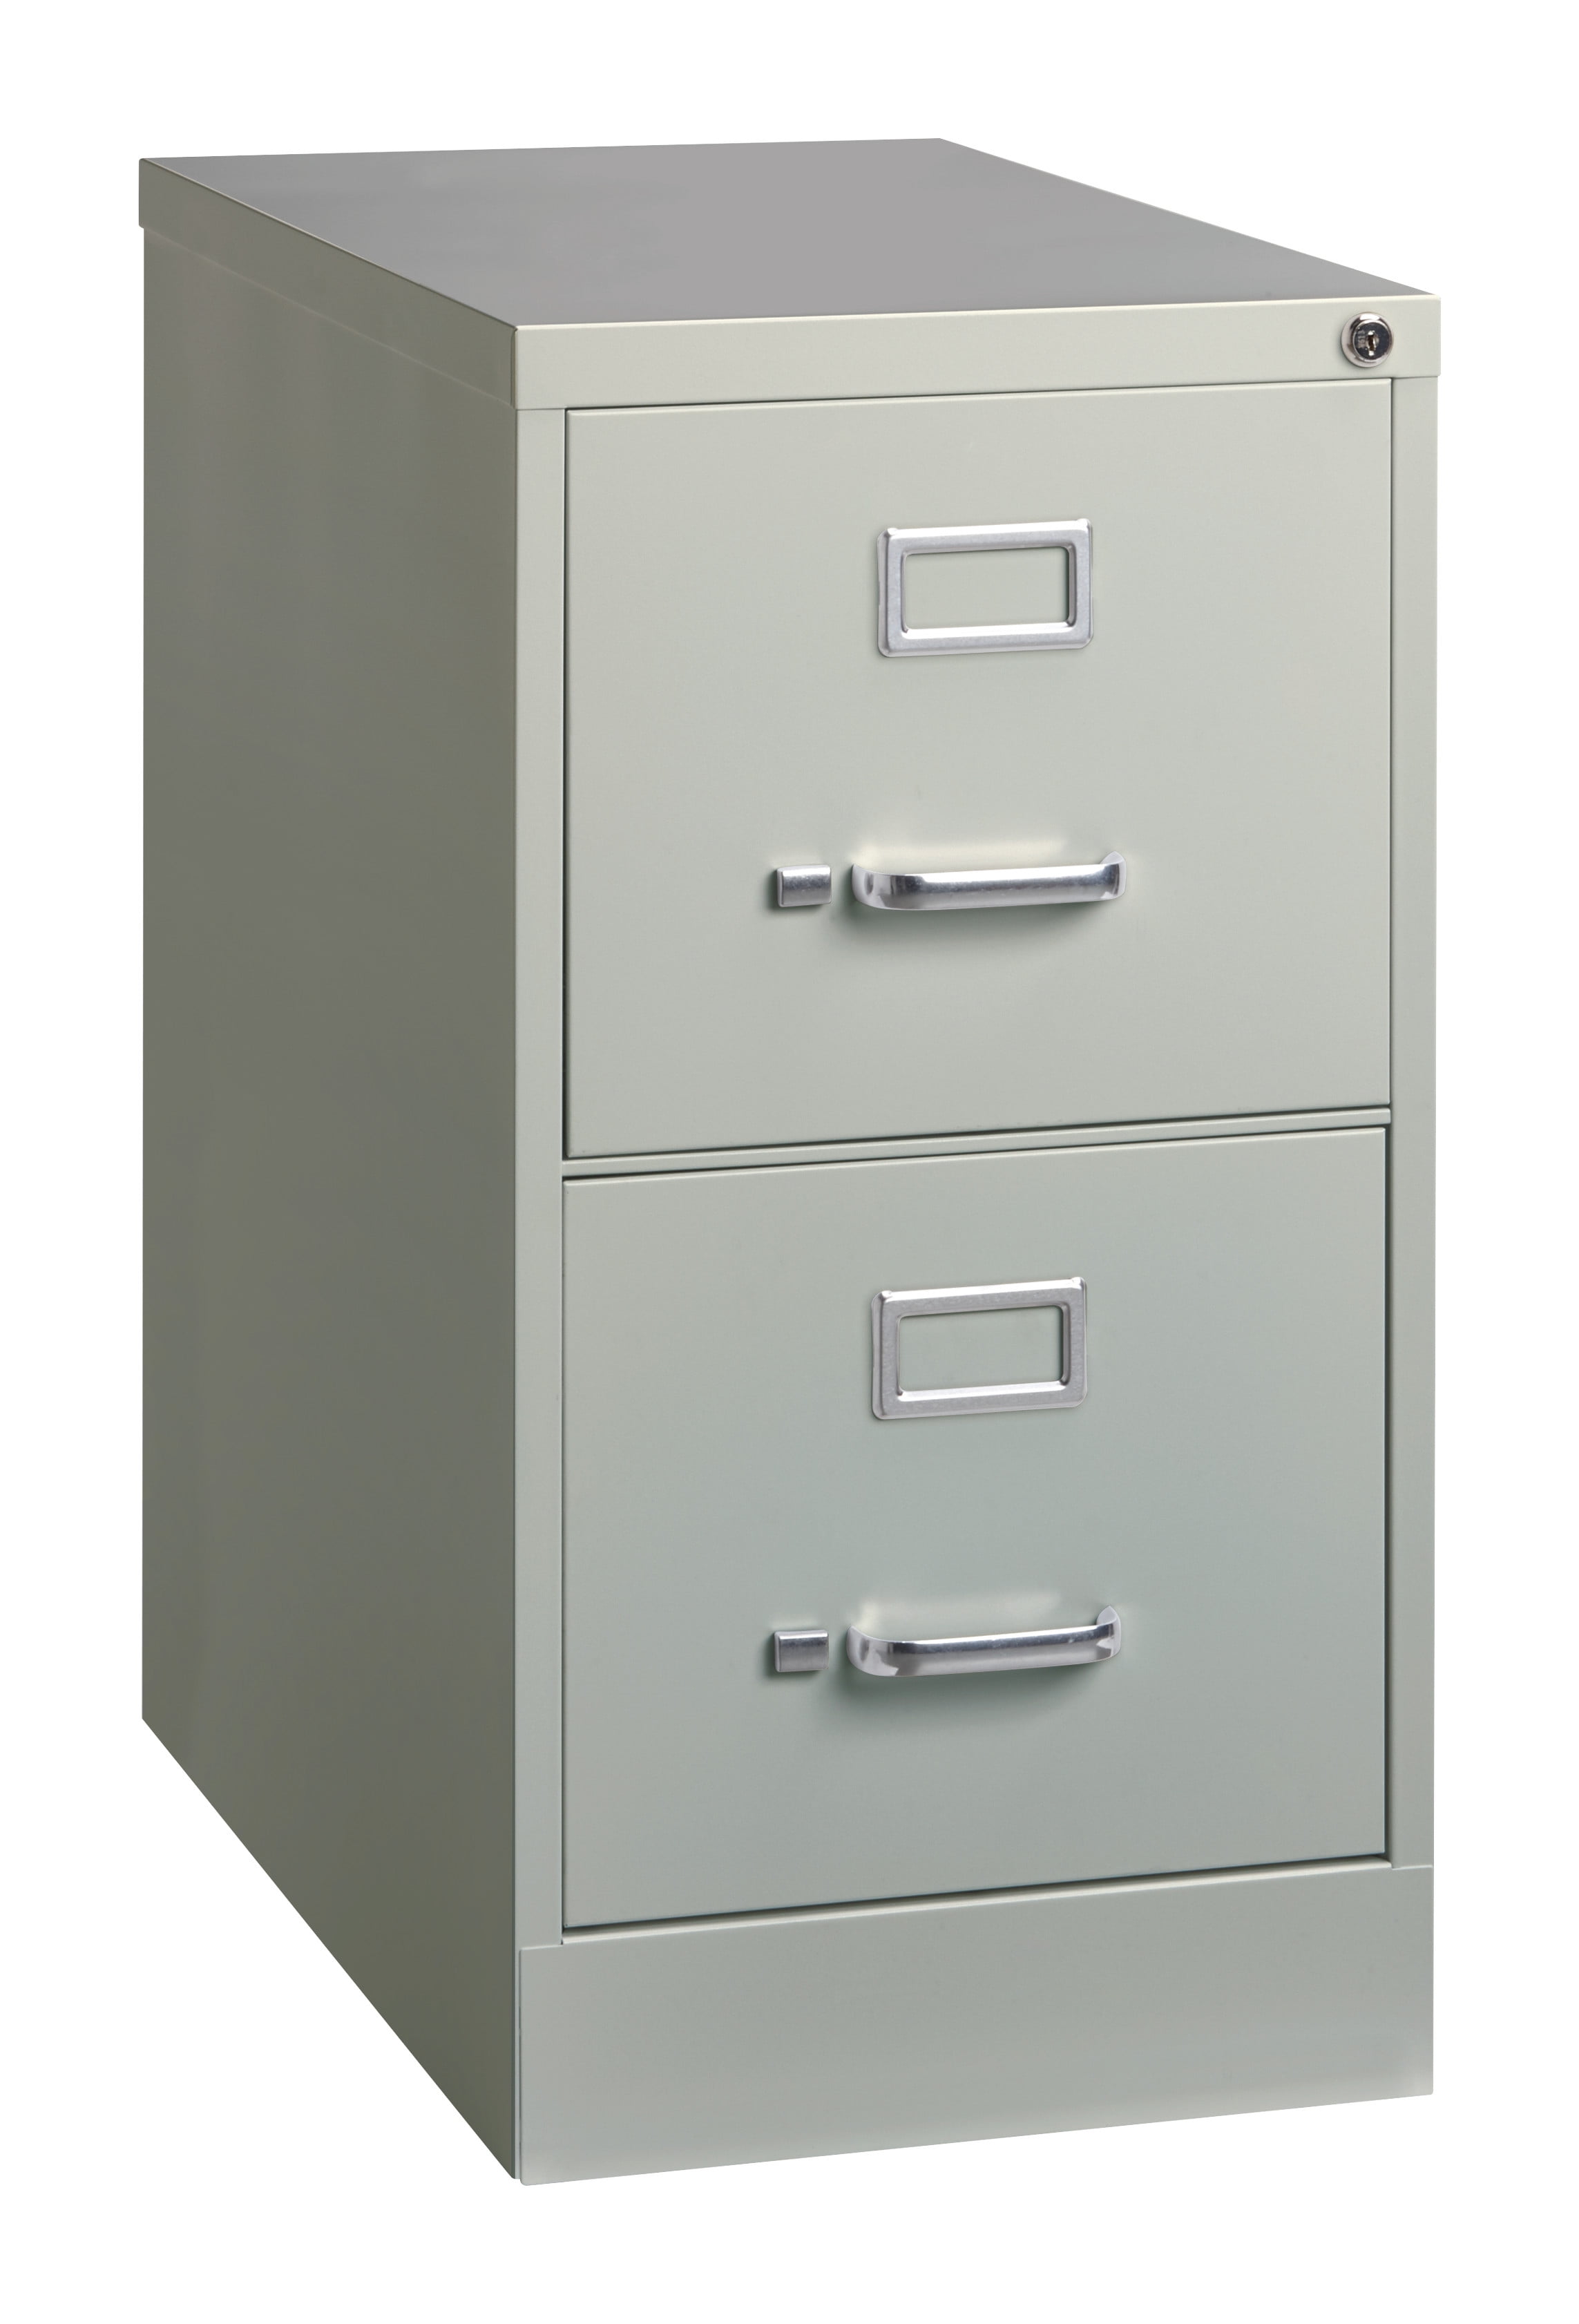  Hirsh Industries 25 Deep Vertical File Cabinet 2-Drawer Letter  Size, Putty, 14409 : Office Products